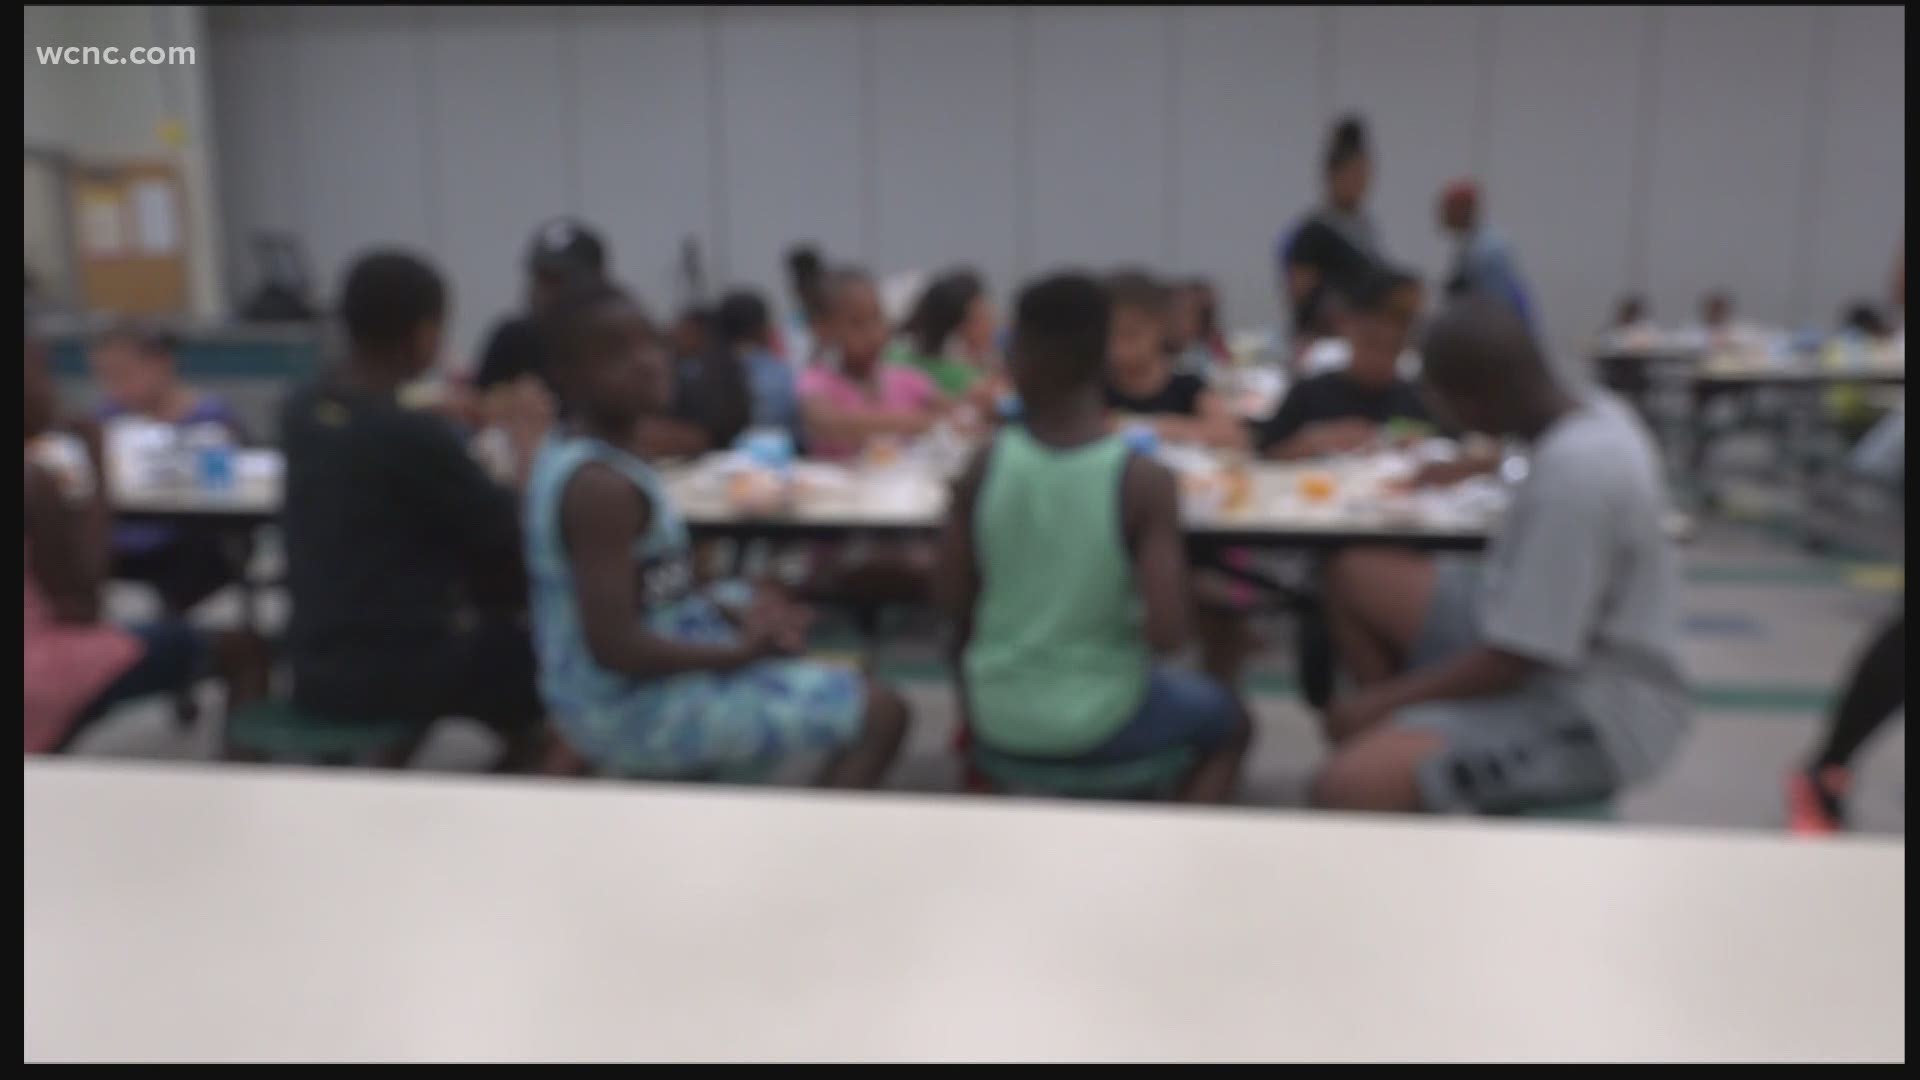 The University hospital is expanding it's Kids Eat free program to address food insecurity throughout the Charlotte region.